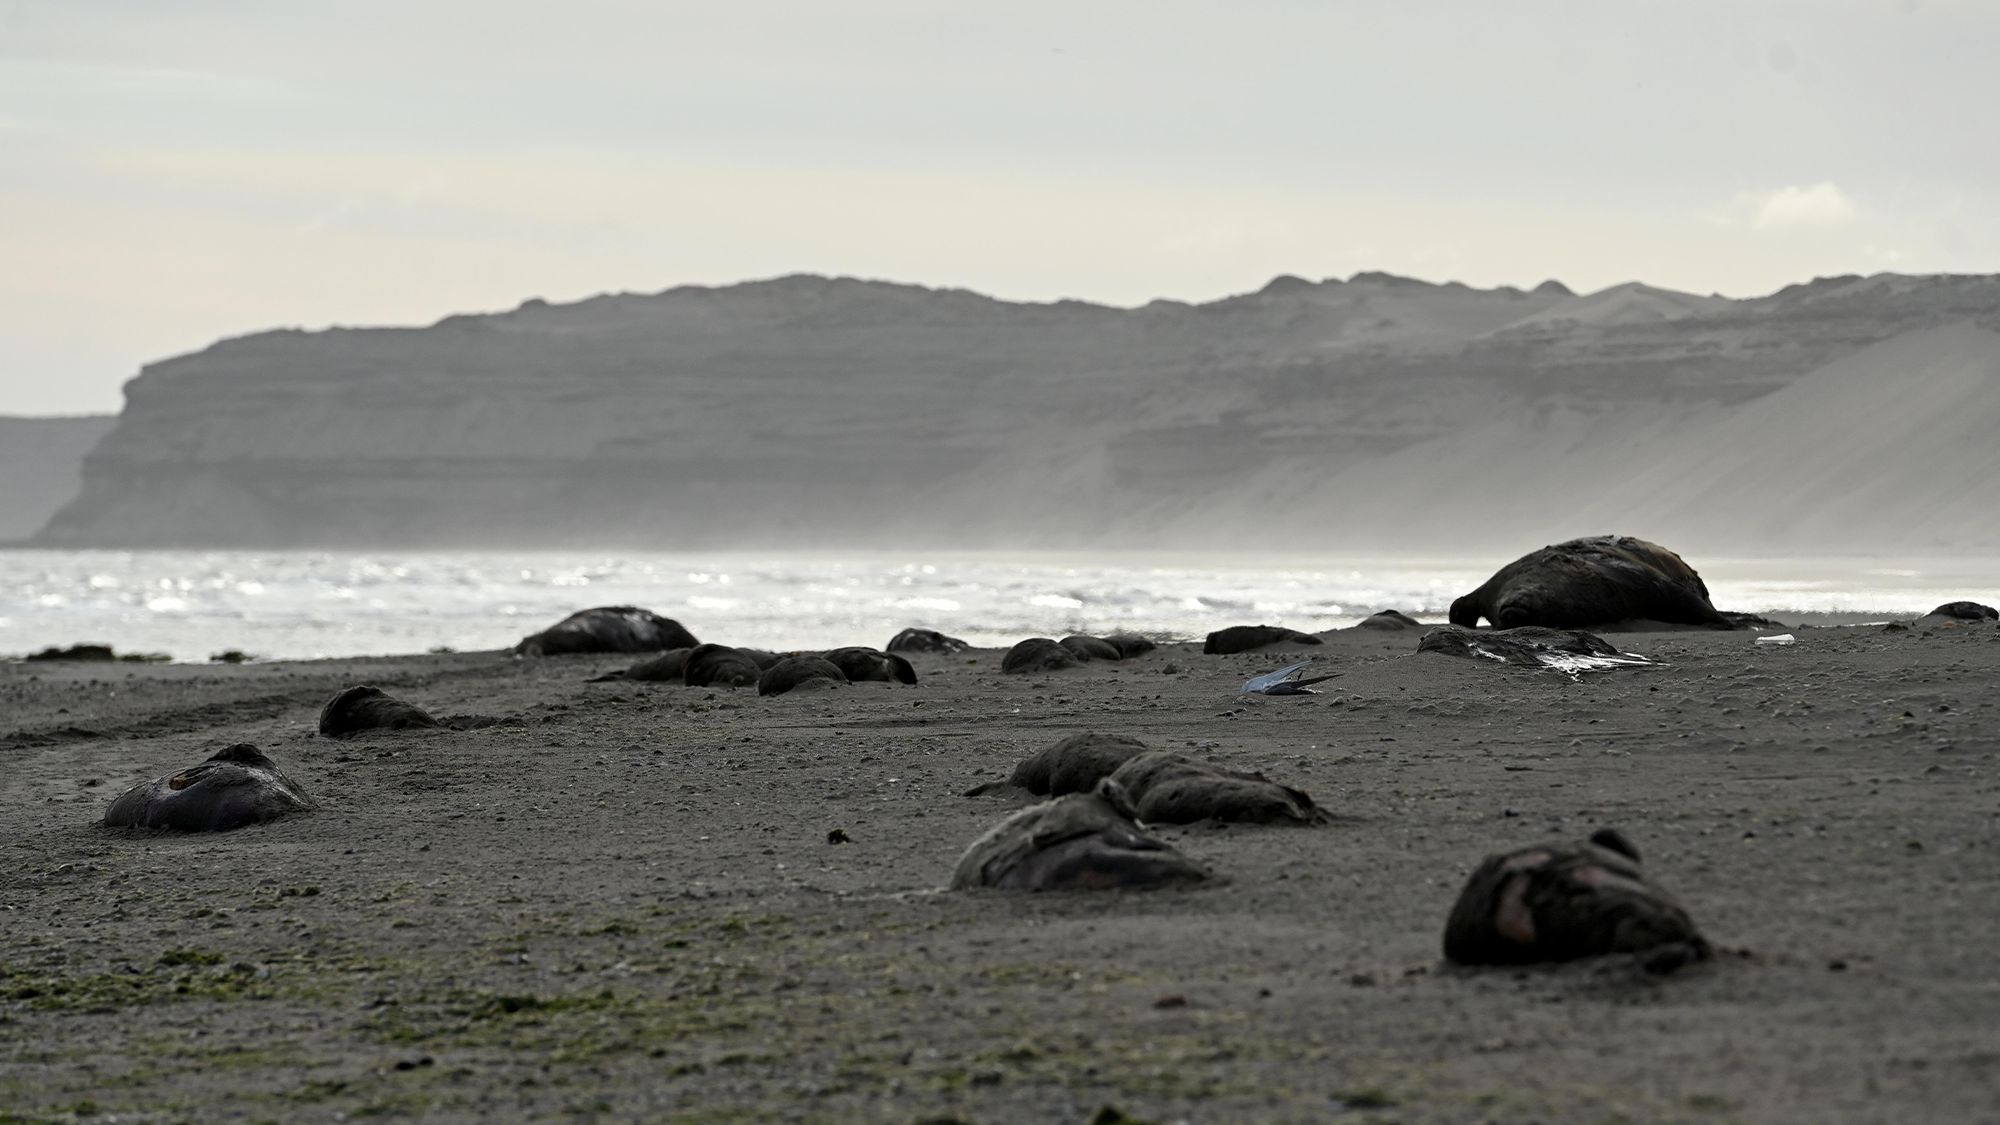 Seal pup die-off from avian flu in Argentina looks ‘apocalyptic’